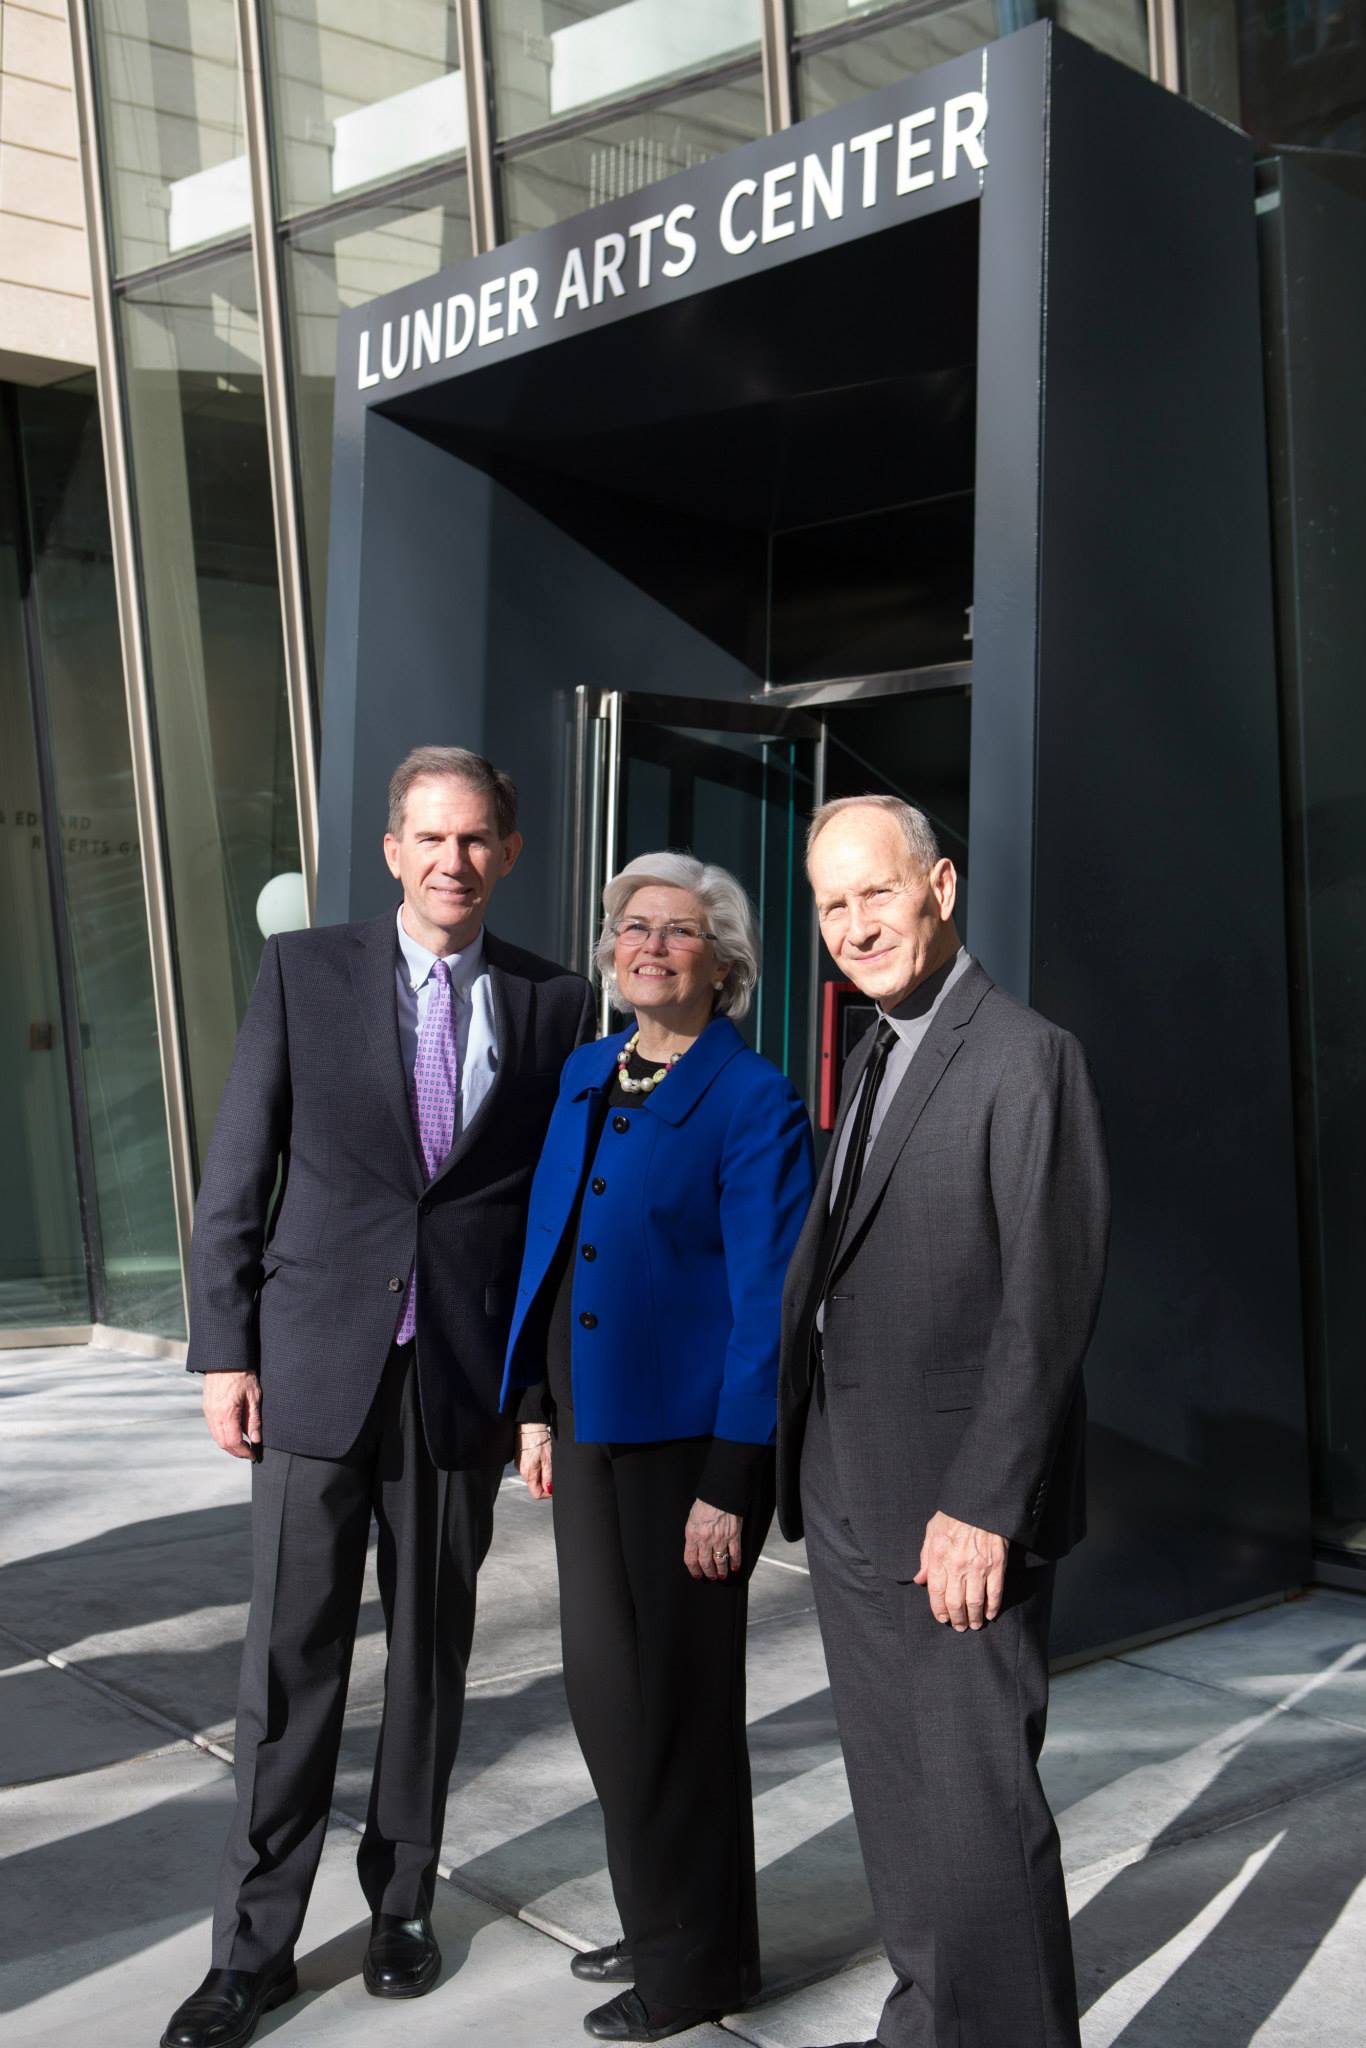 Joe Moore, Marylou Batt and Stan Trecker in front of the entrance to the Lunder Arts Center